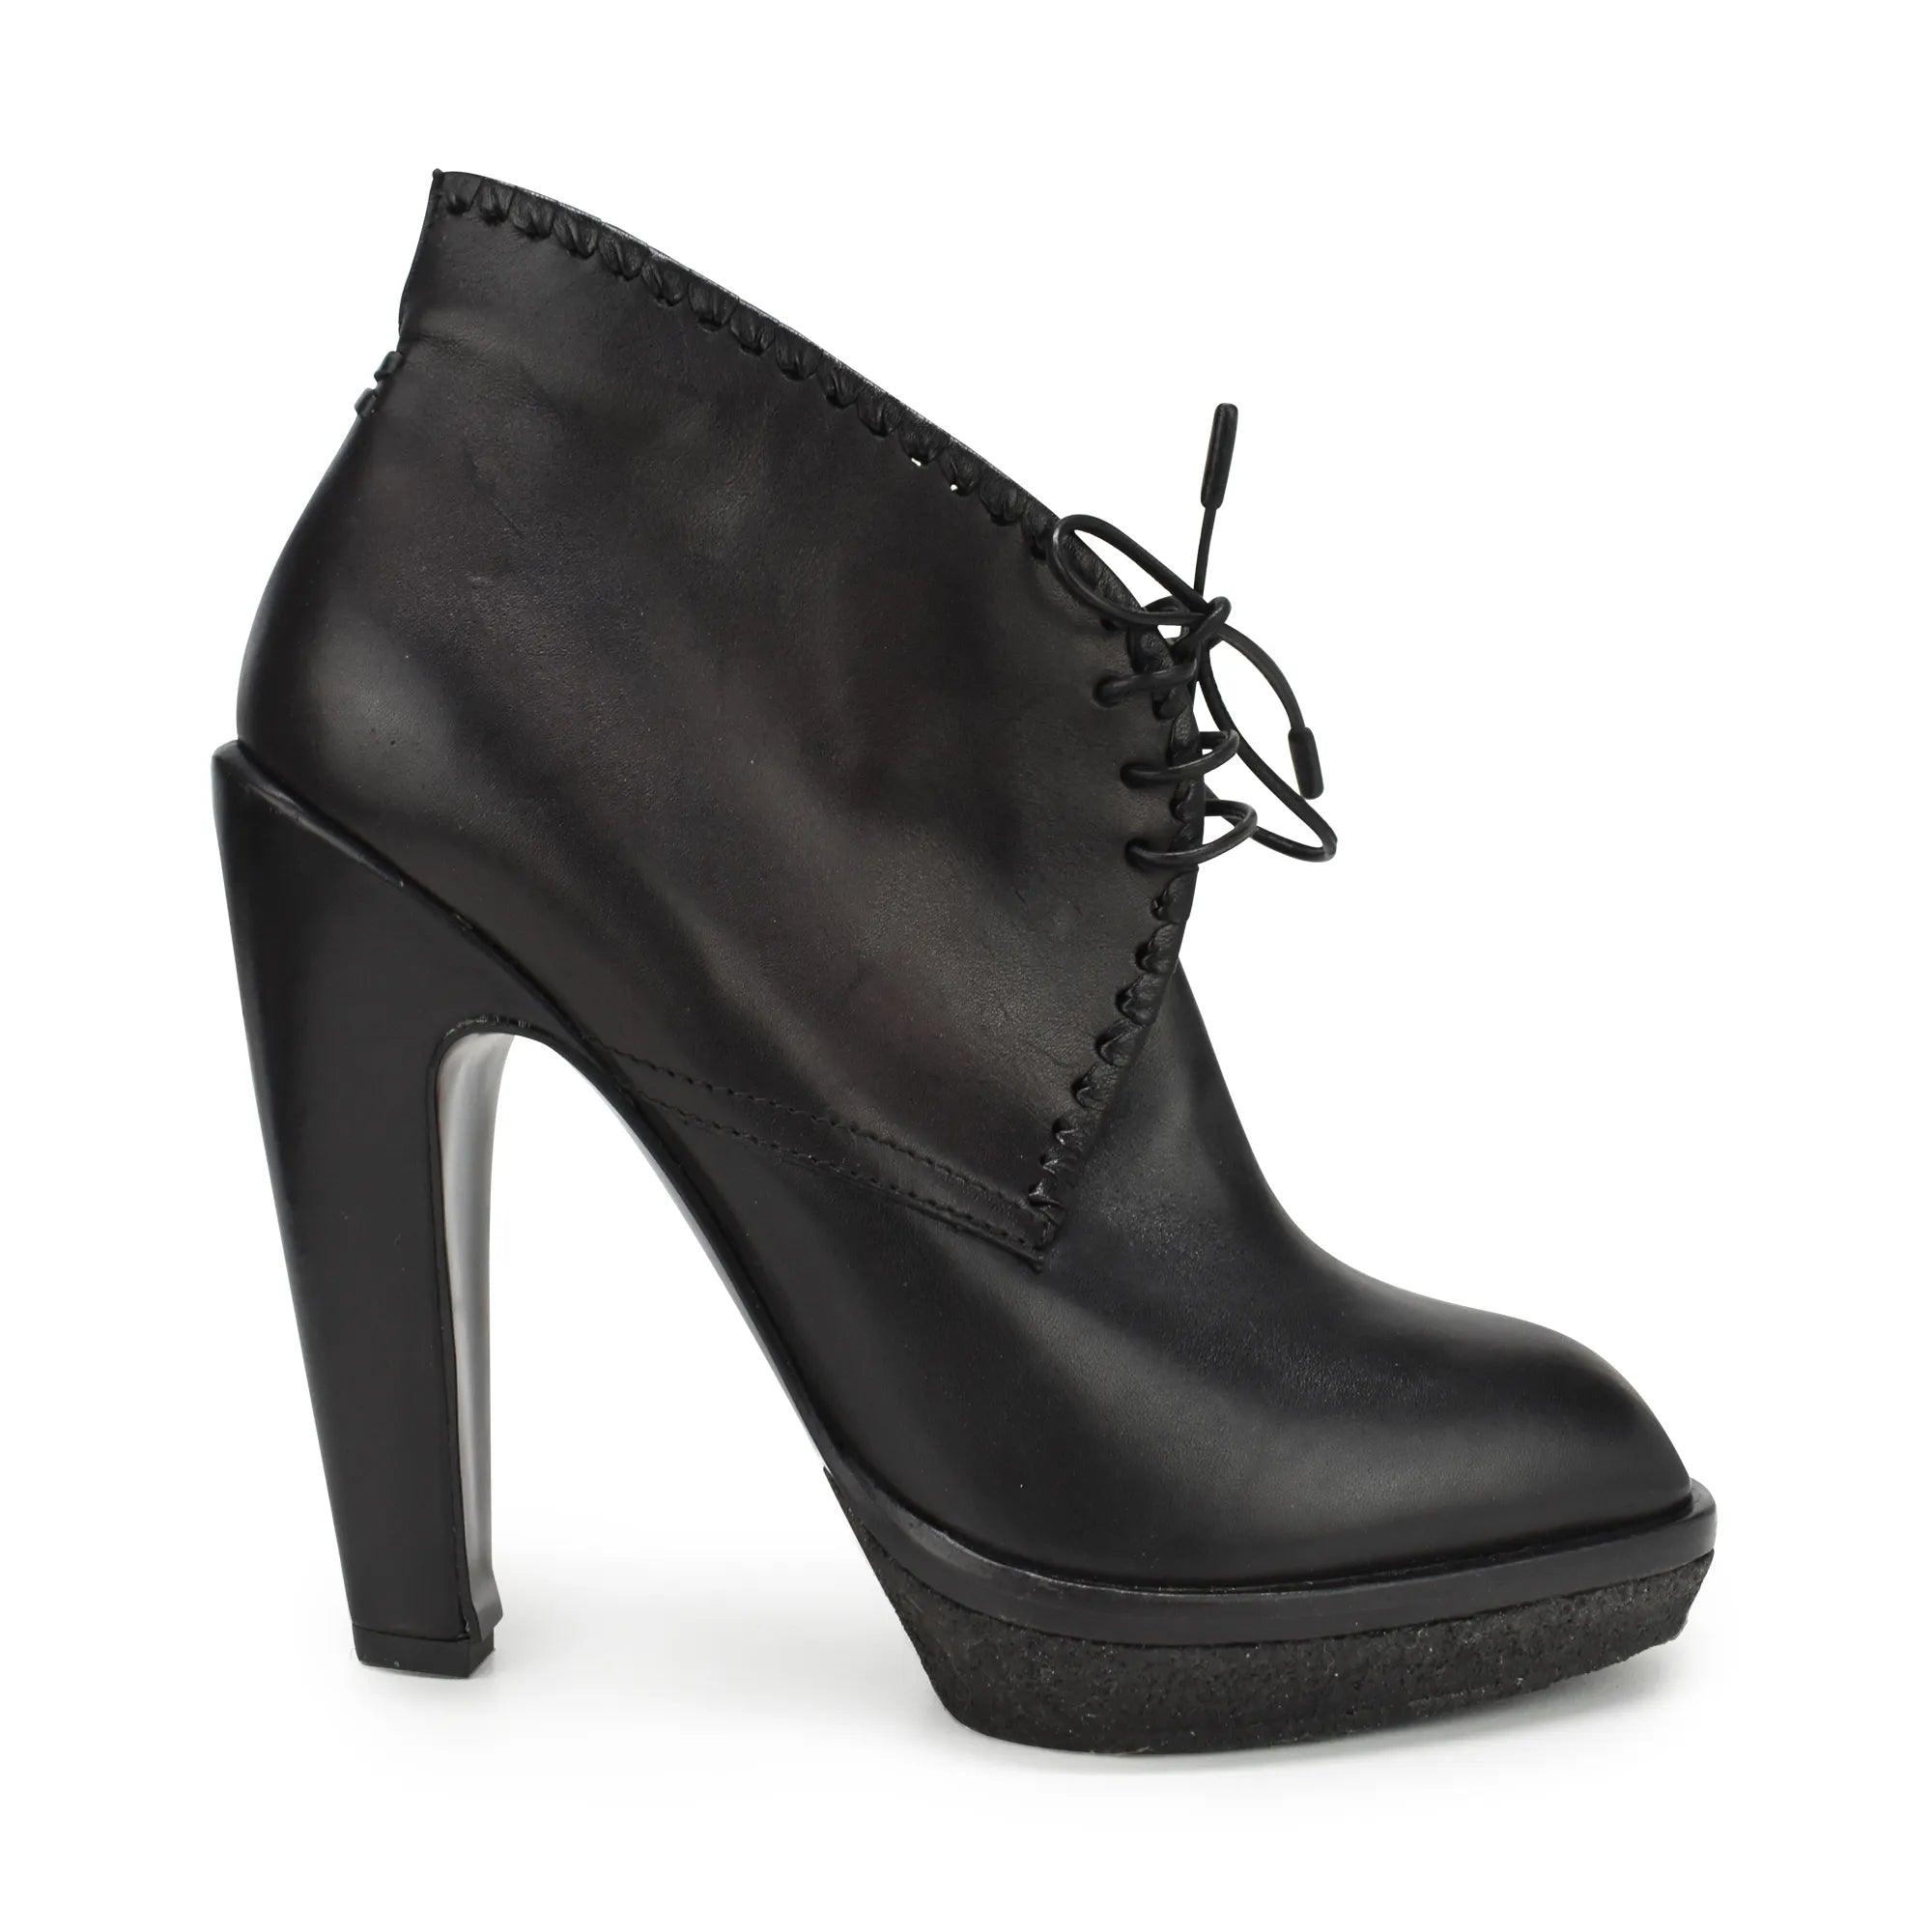 Alaia Booties - Women's 37.5 - Fashionably Yours